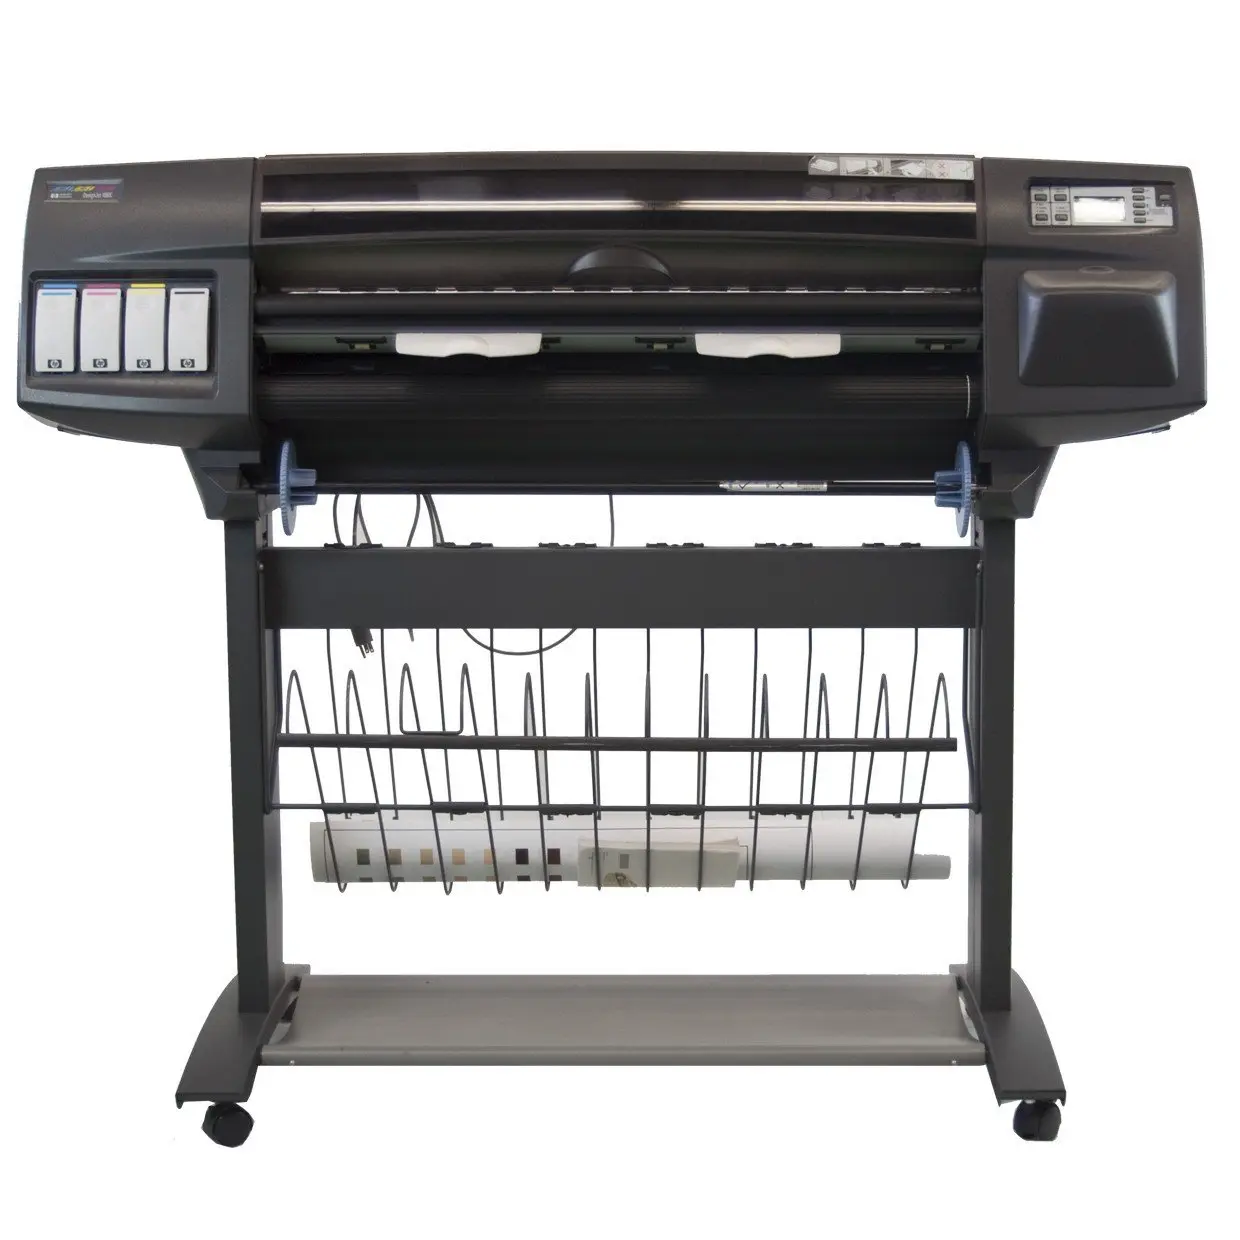 Hp designjet 1055cm: high-quality printing for professionals